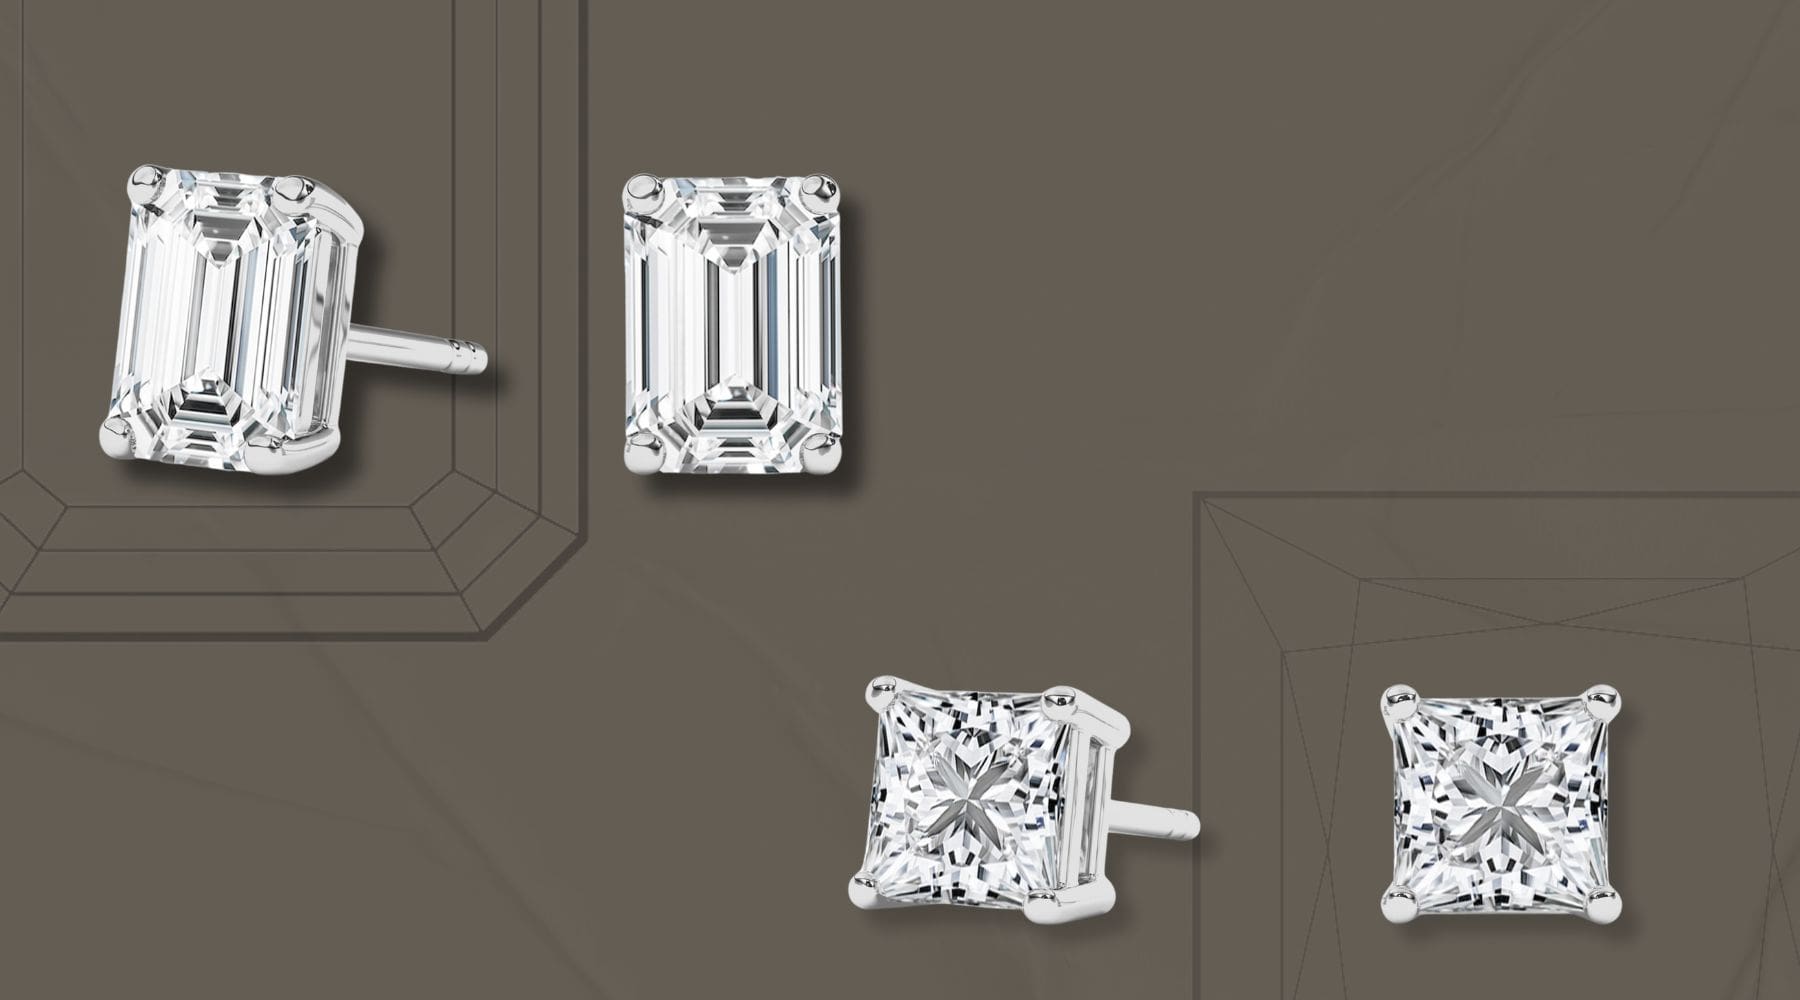 https://earthshinejewels.com/collections/diamond-stud-earrings